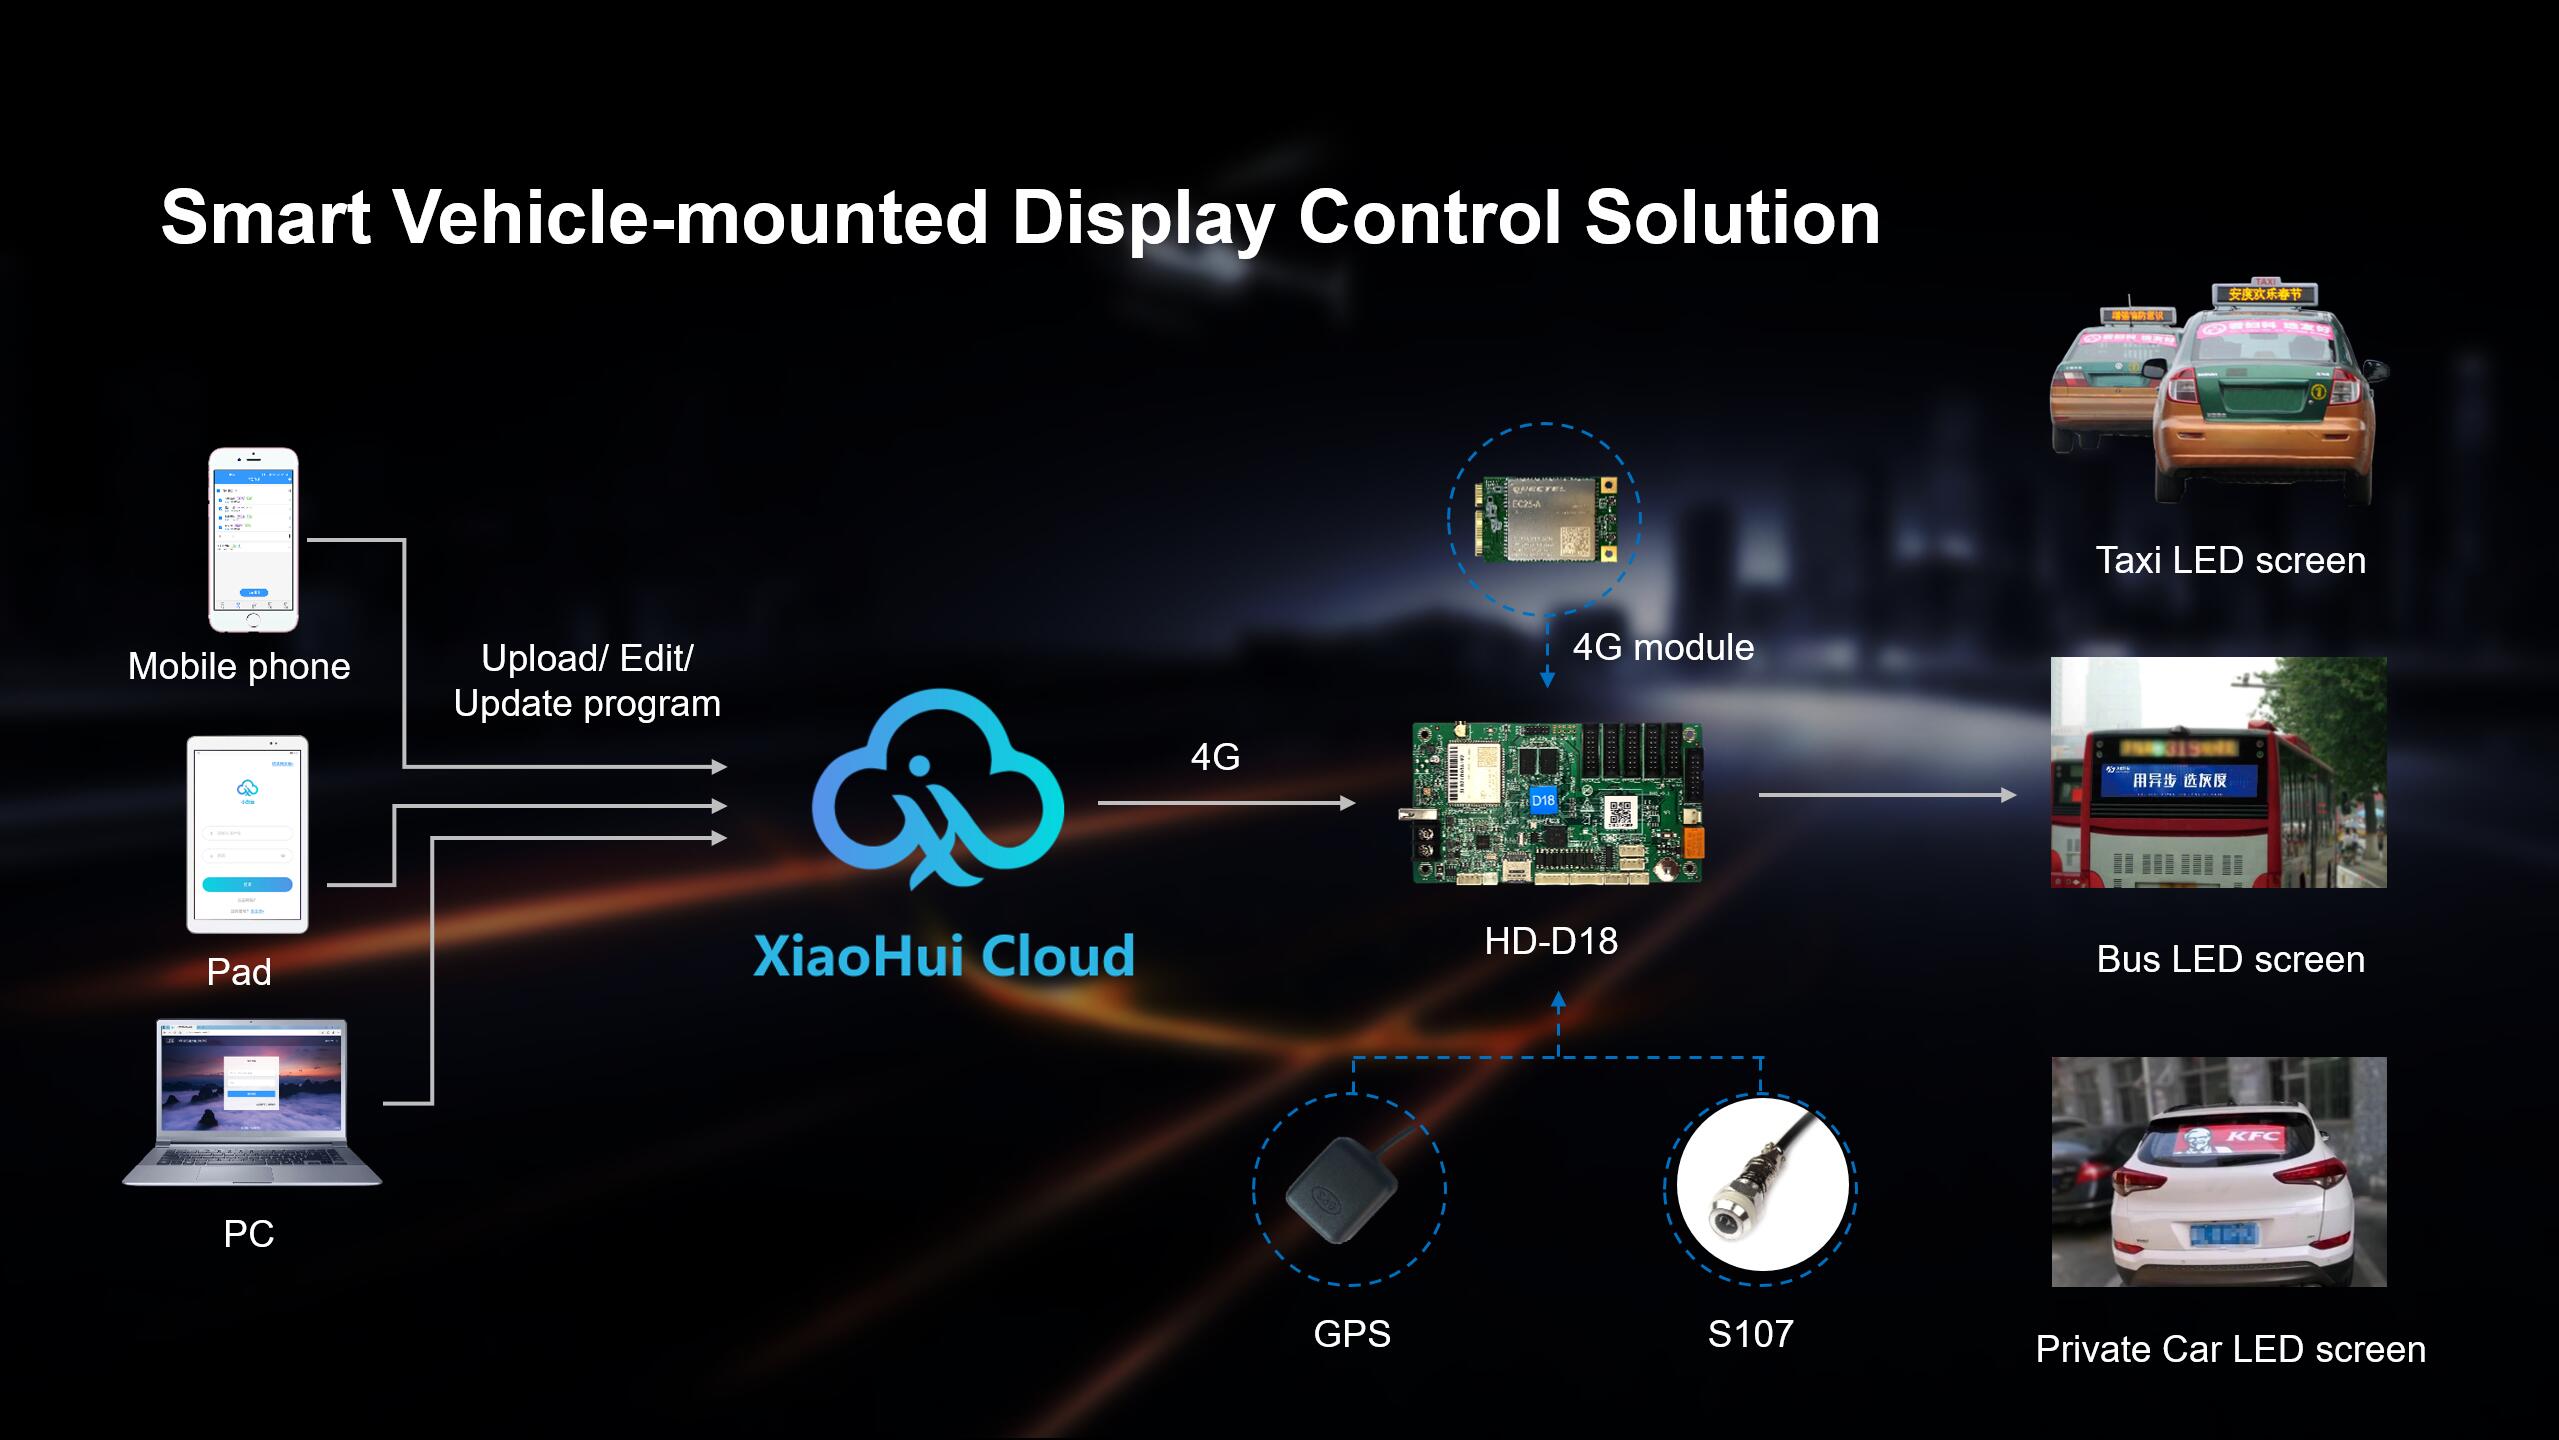 Smart Vehicle-mounted Display Control Solution